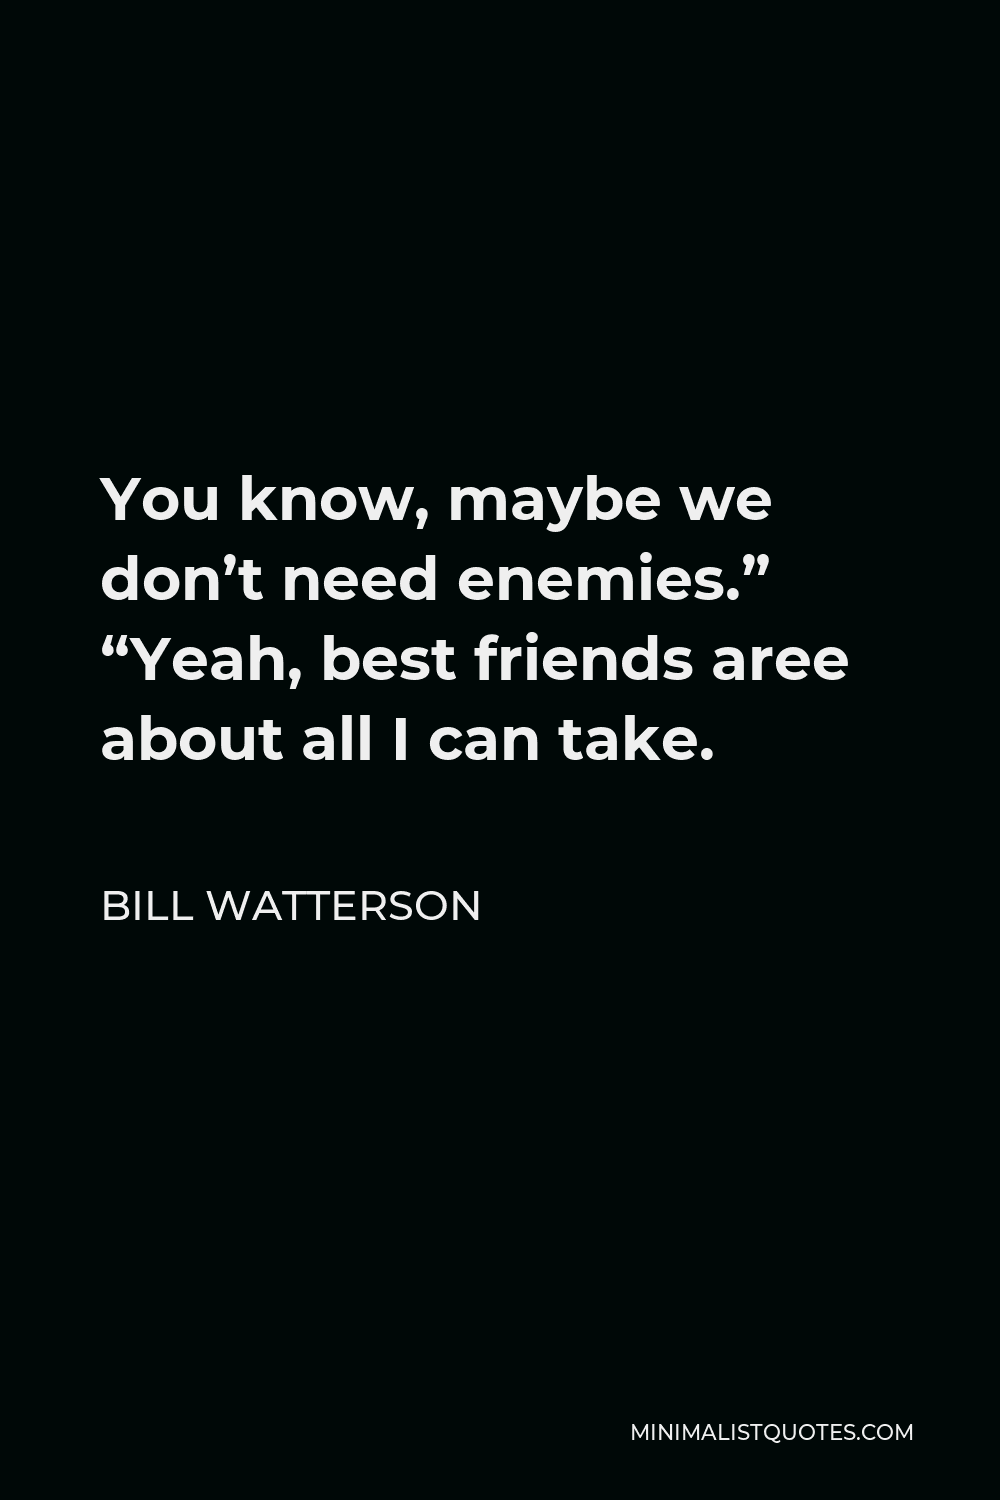 Bill Watterson Quote - You know, maybe we don’t need enemies.” “Yeah, best friends aree about all I can take.